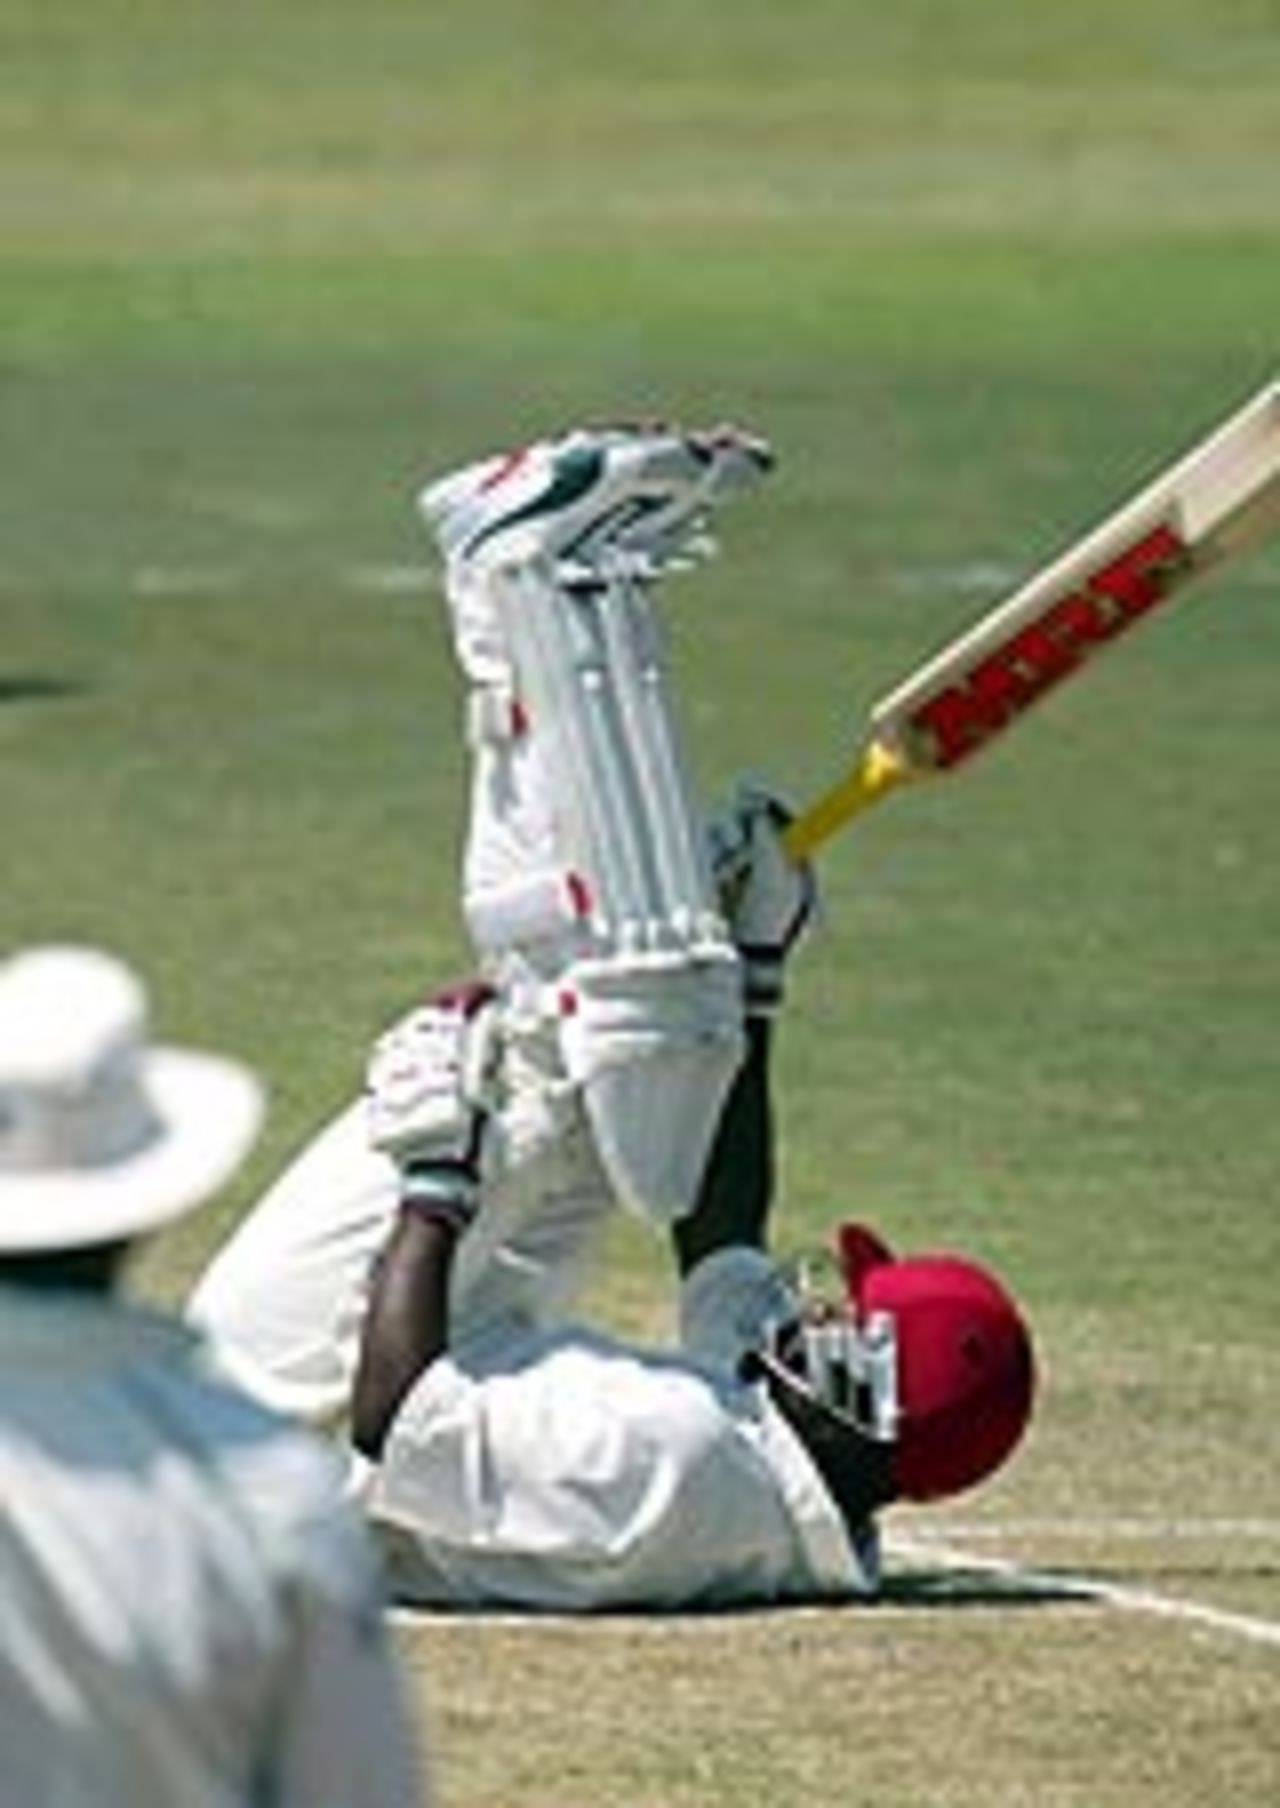 Brian Lara on his backside - West Indies v South Africa, 4th Test, Centurion, January 2003